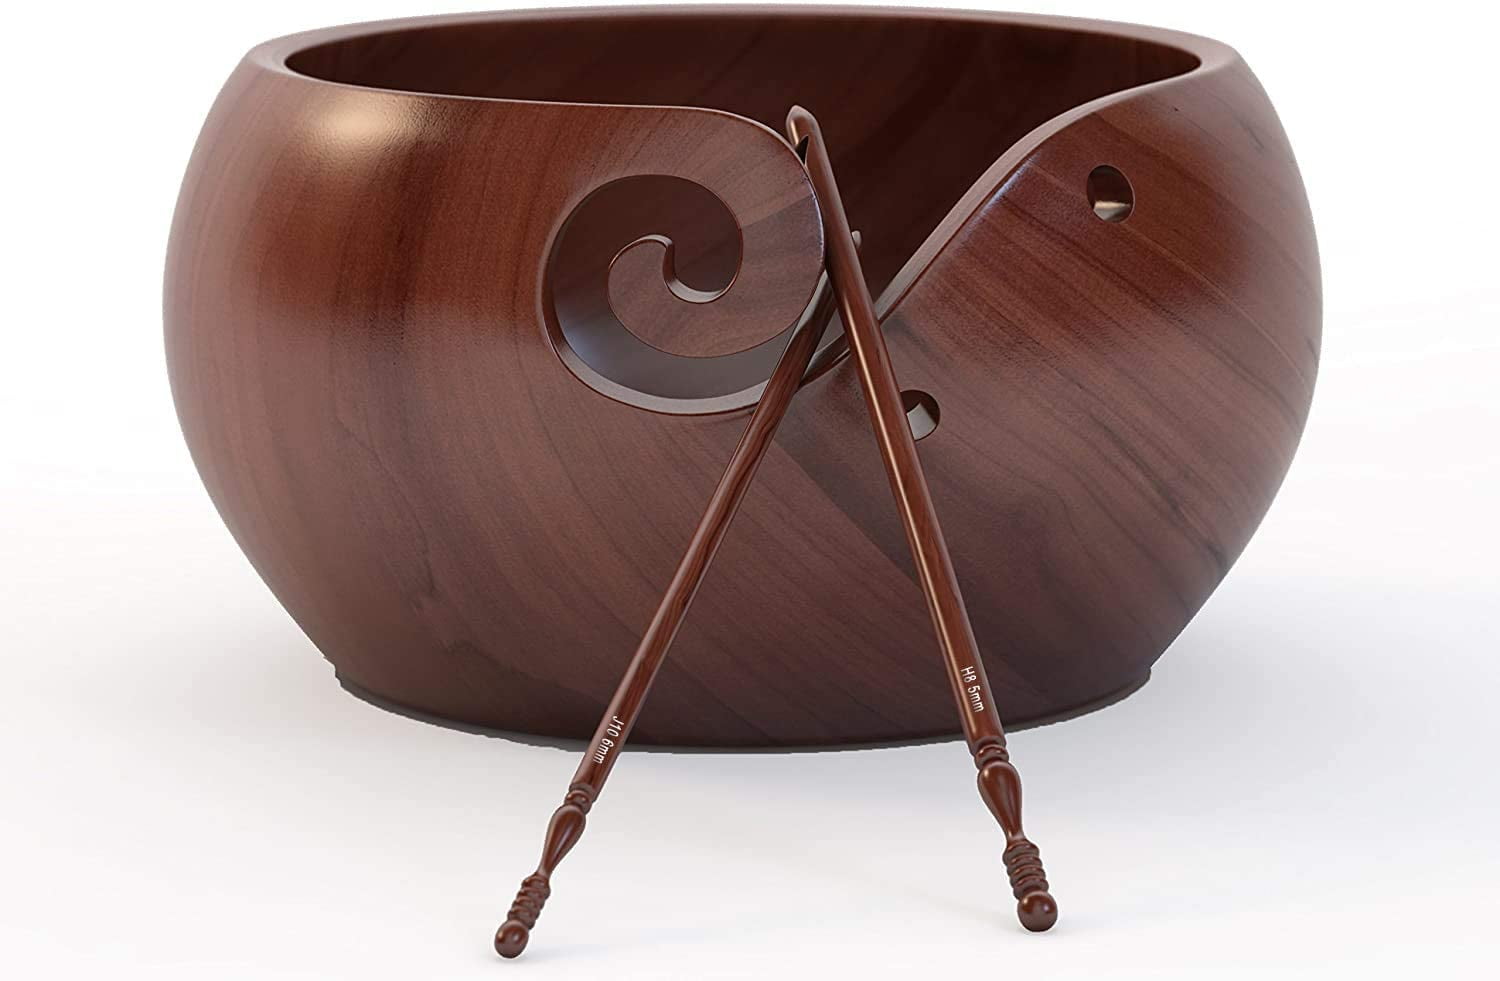 Ravel Large Wooden Yarn Bowls for Crochet Gift Set for Knitting Crochet  with Rosewood Crochet Hook Set (1 x H-8 5mm, 1 x J-10 6mm), 7x4 inches  Handcrafted Rosewood Yarn Holder and